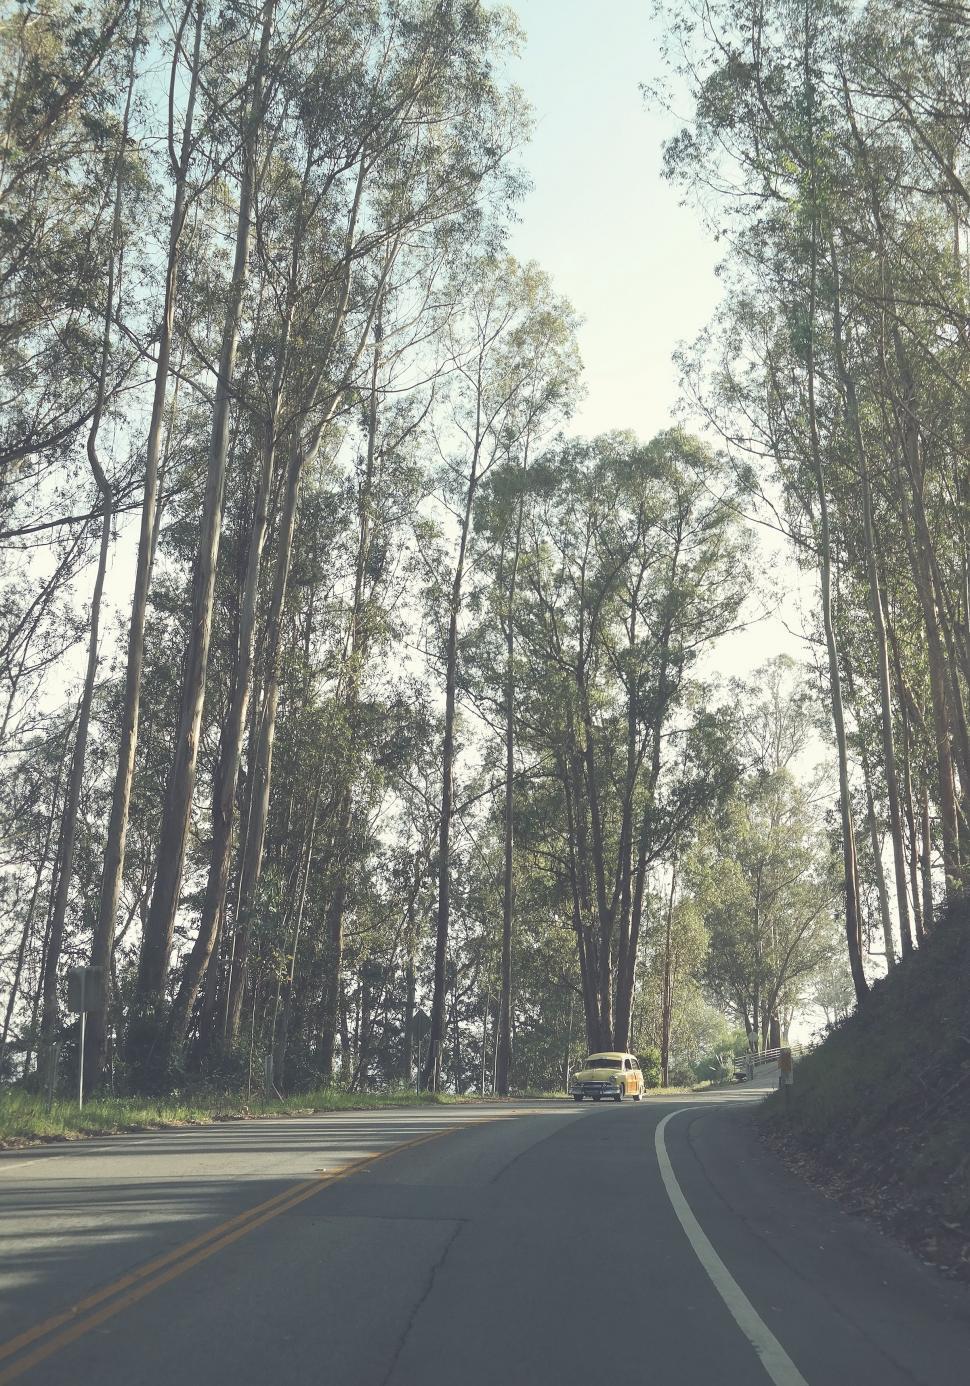 Free Image of Car Driving Down Road Surrounded by Tall Trees 